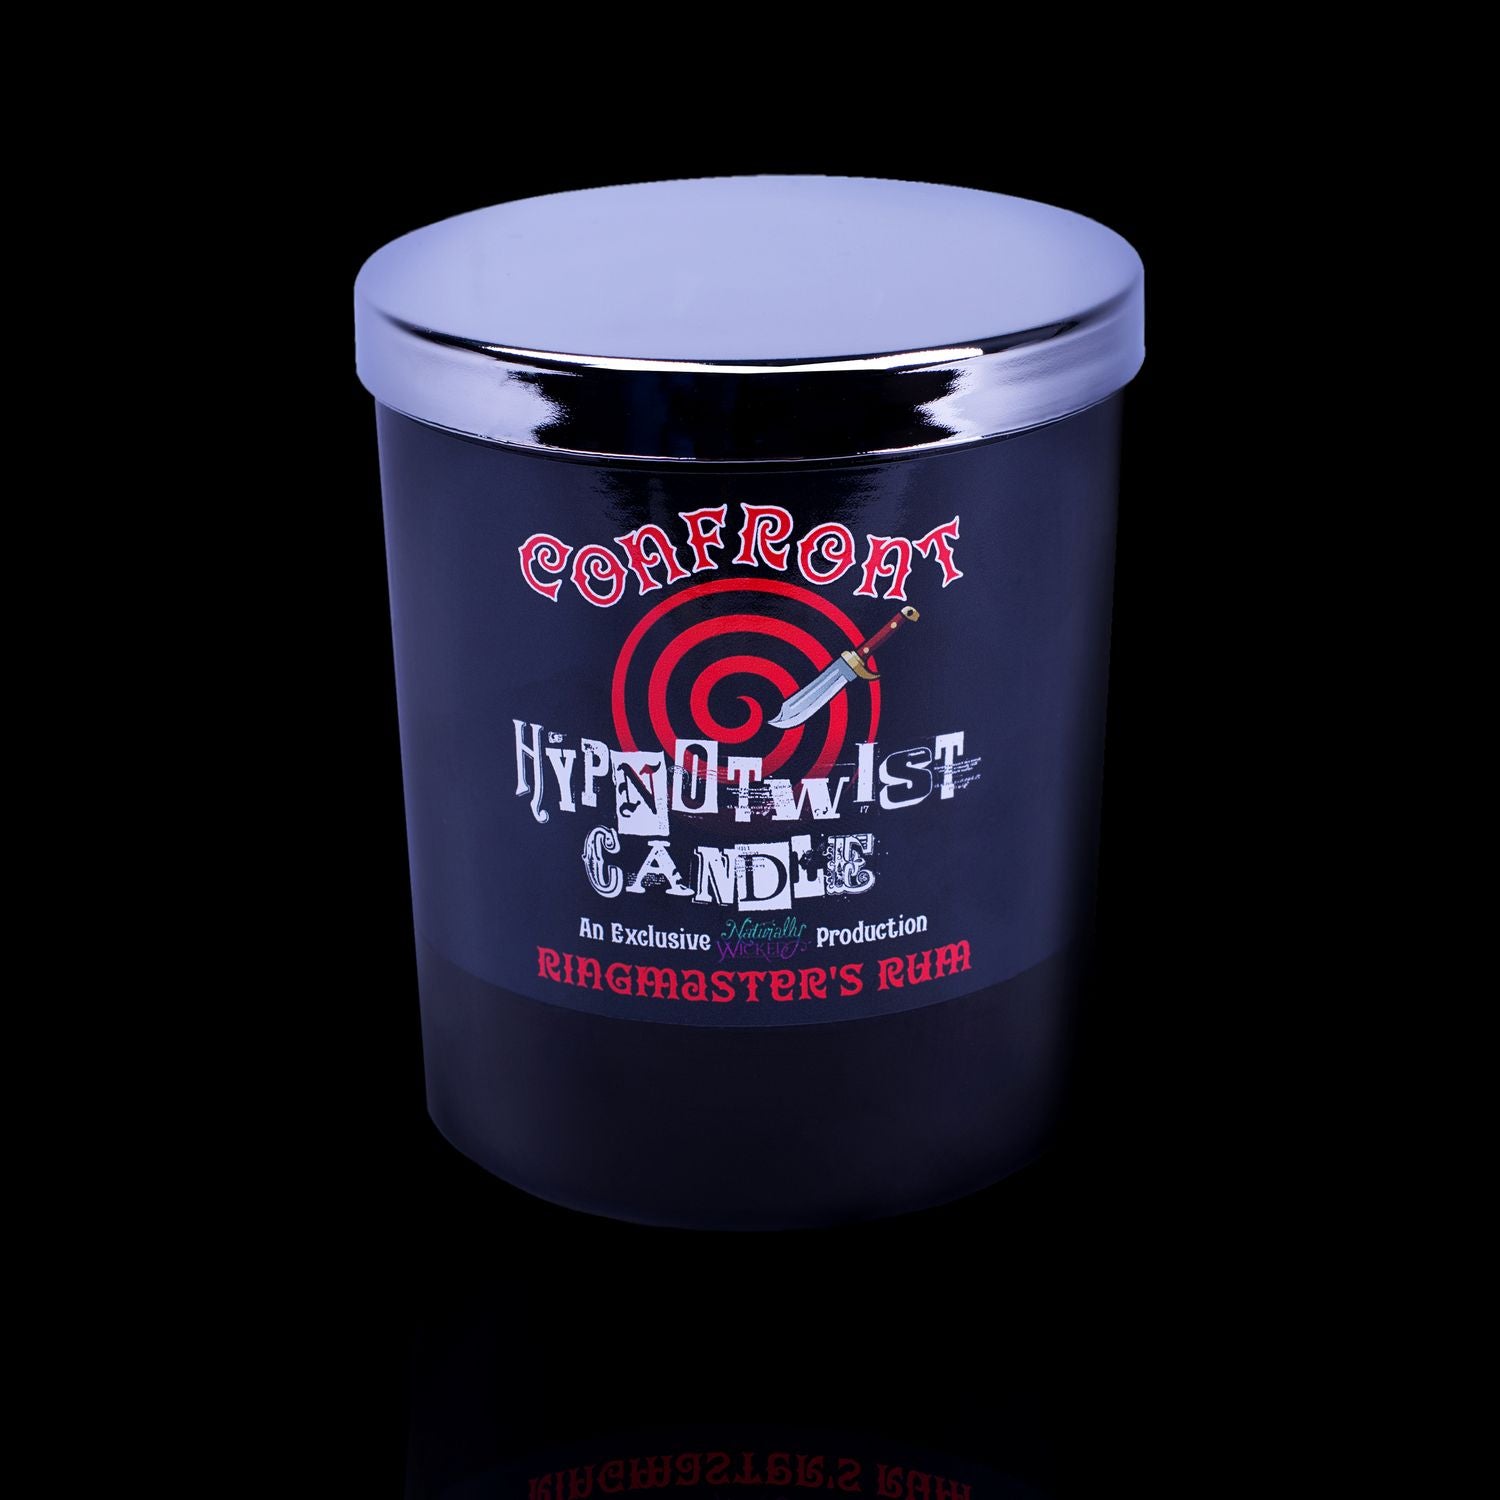 Confront Your Fears With The Naturally Wicked Hypnotwist Confront Candle Featuring Plant-based Soy Red Wax Scented With Ringmaster's Rum & Includes A Red Jasper Crystal Spinning Top & Mirrored Lid